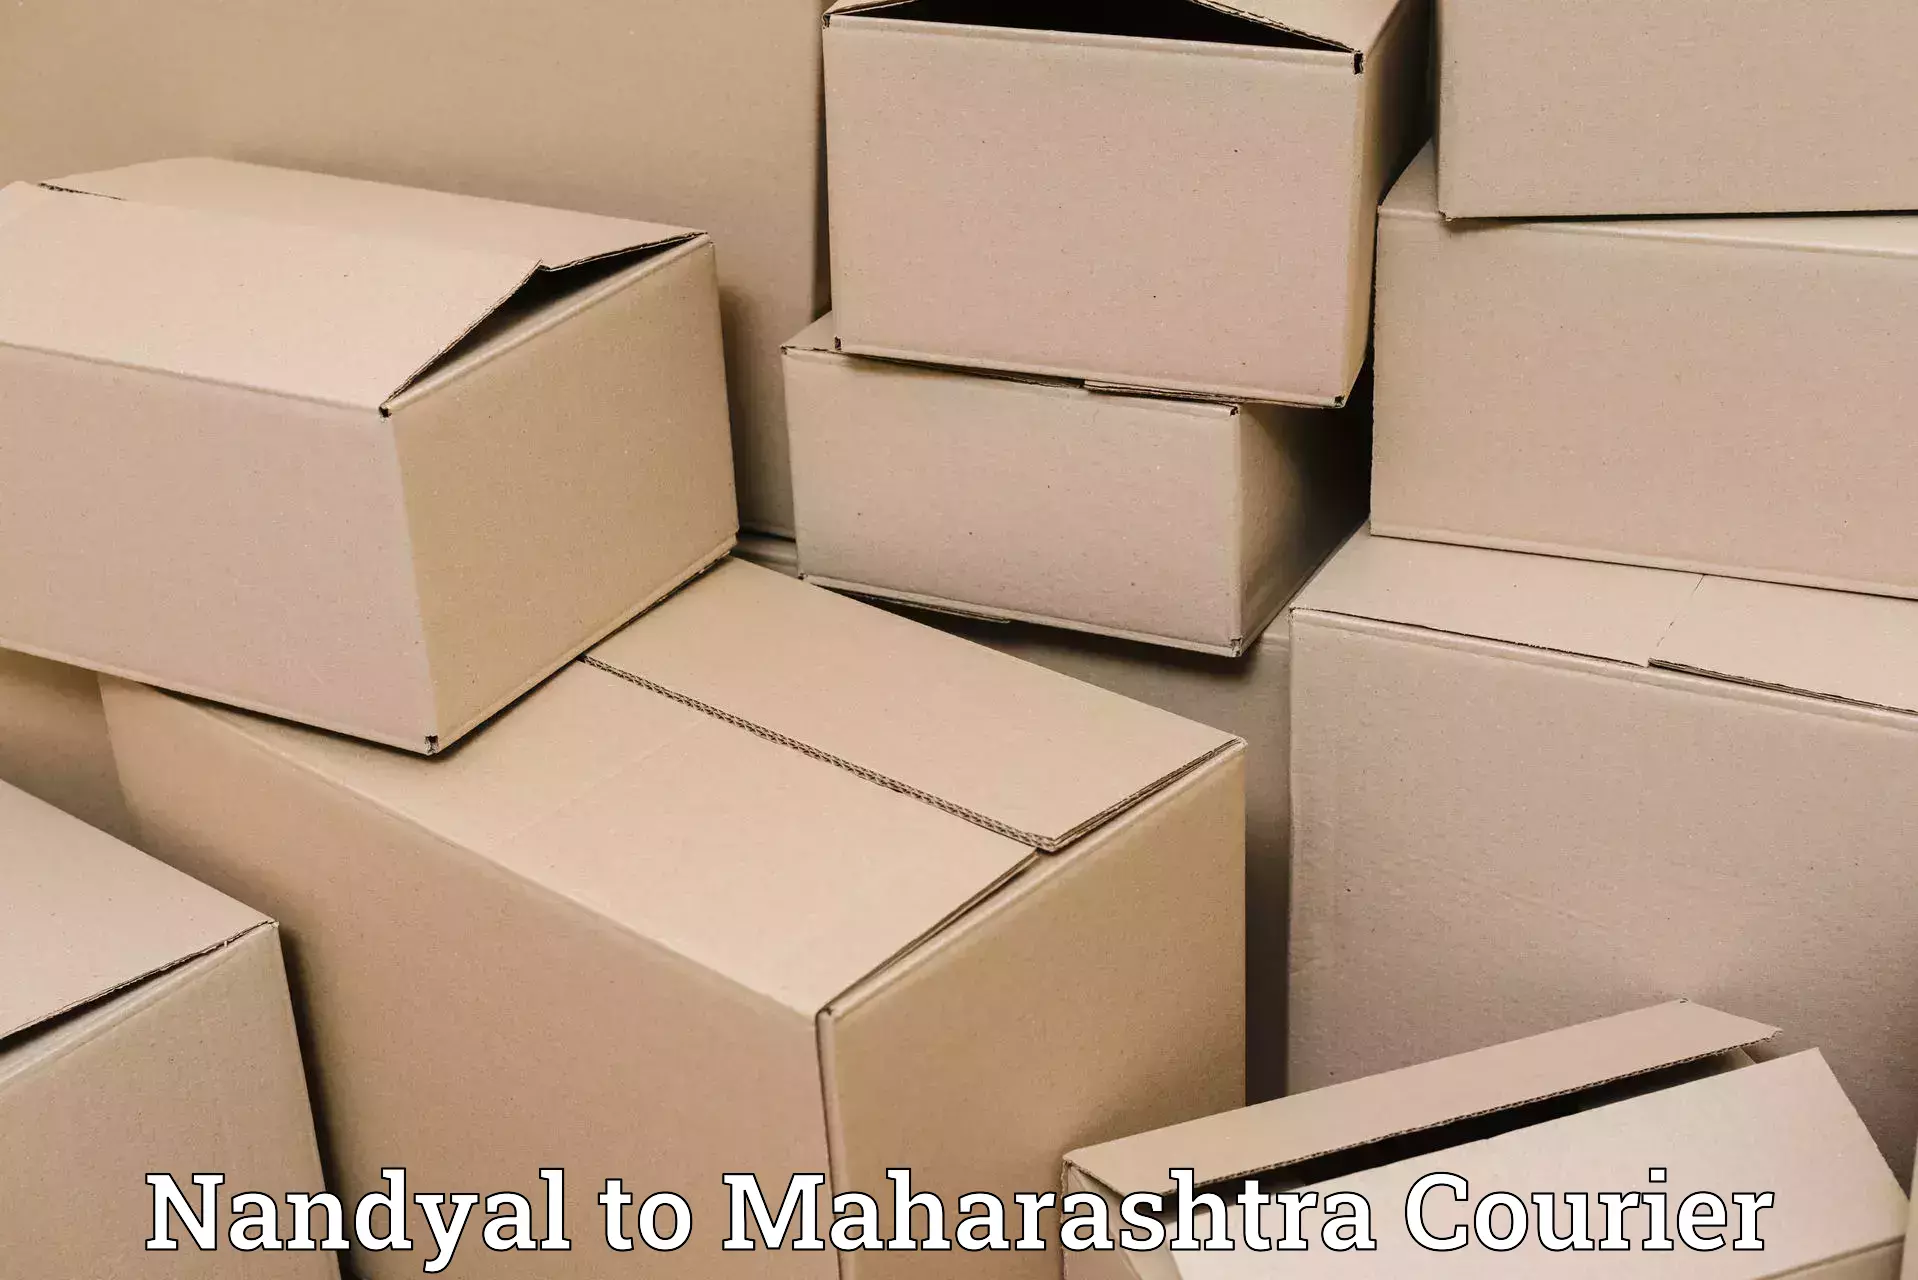 International courier networks Nandyal to Talegaon Dabhade